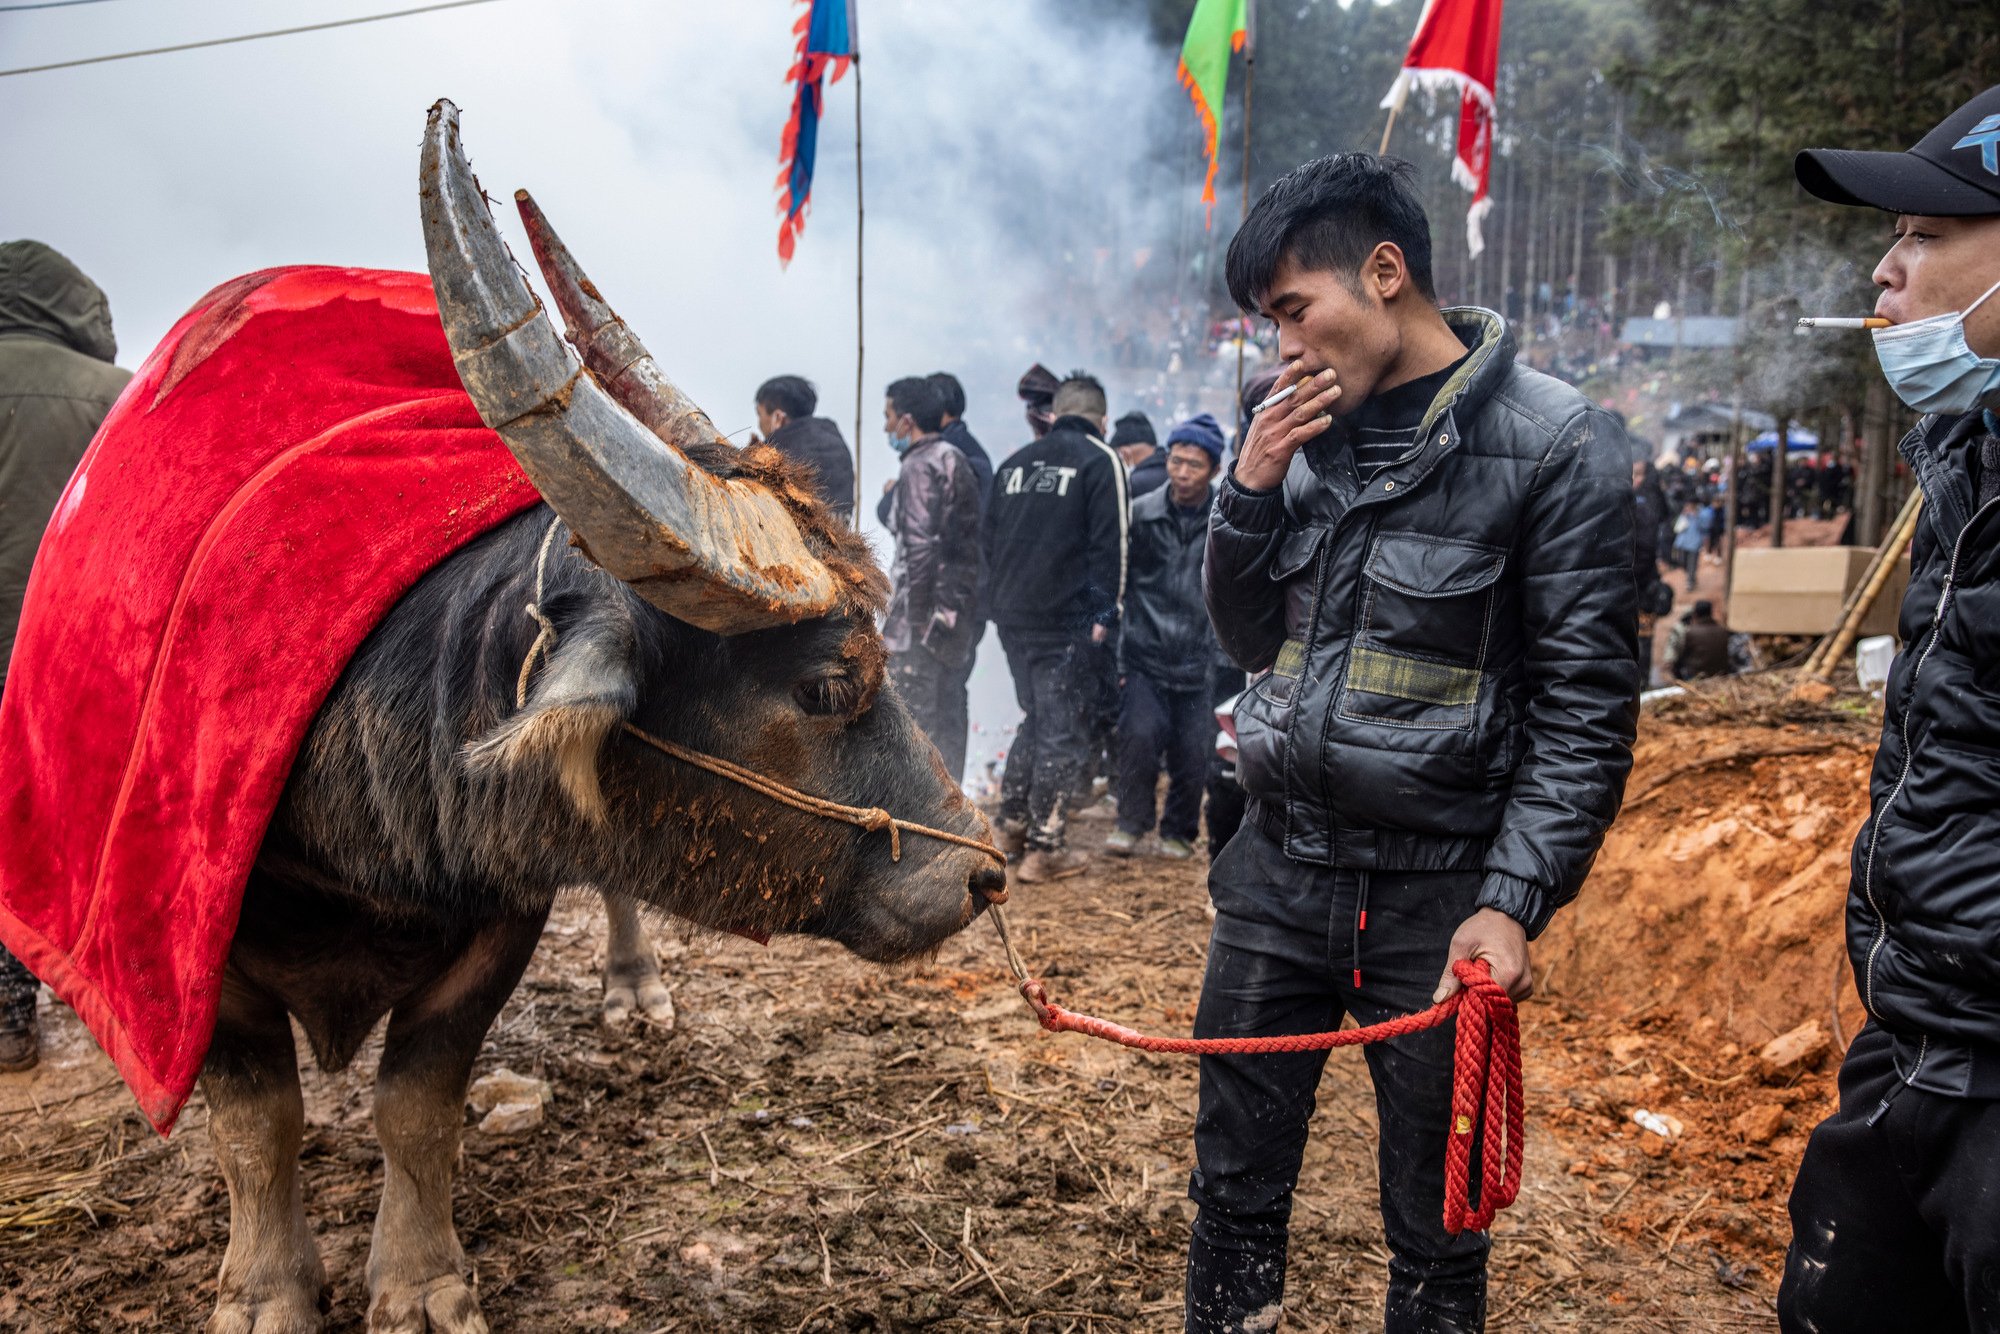  Buffalo handler with his buffalo getting ready to return to the home village after the match. The buffalo is wearing a blanket to keep him warm on a cold day in January. Wangdong village, Guizhou, China. 